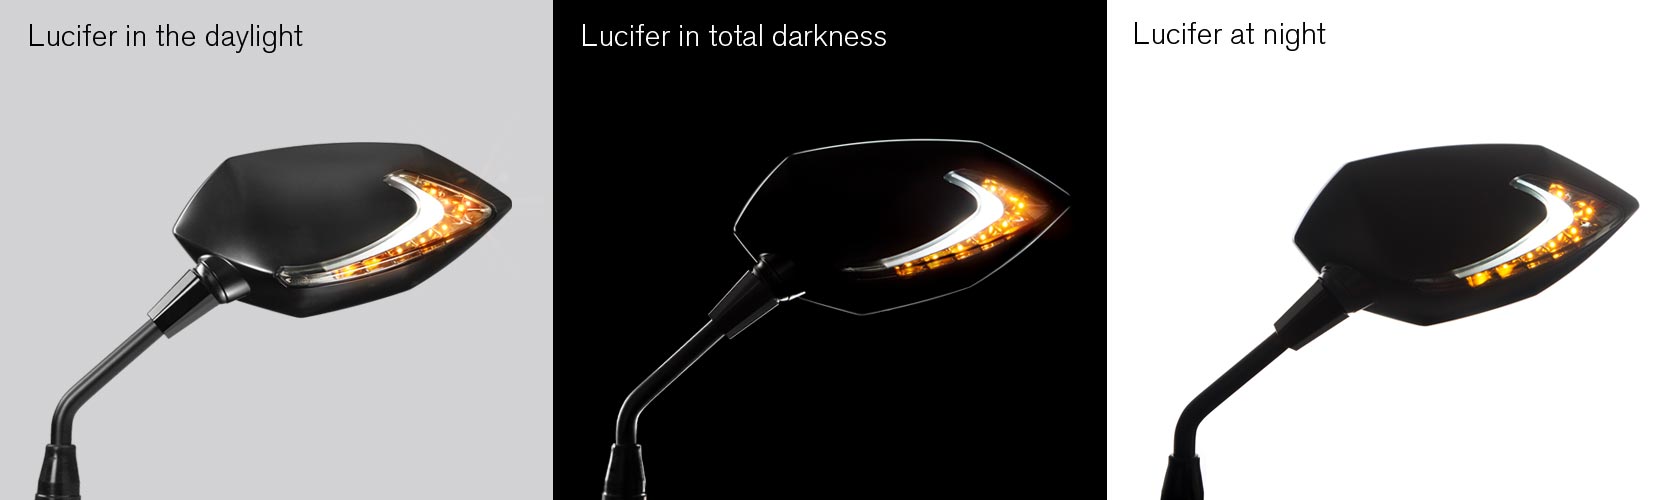 Lucifer LED Motorcycle mirror turn signal, driving light, in the daylight, at night, in total darkness